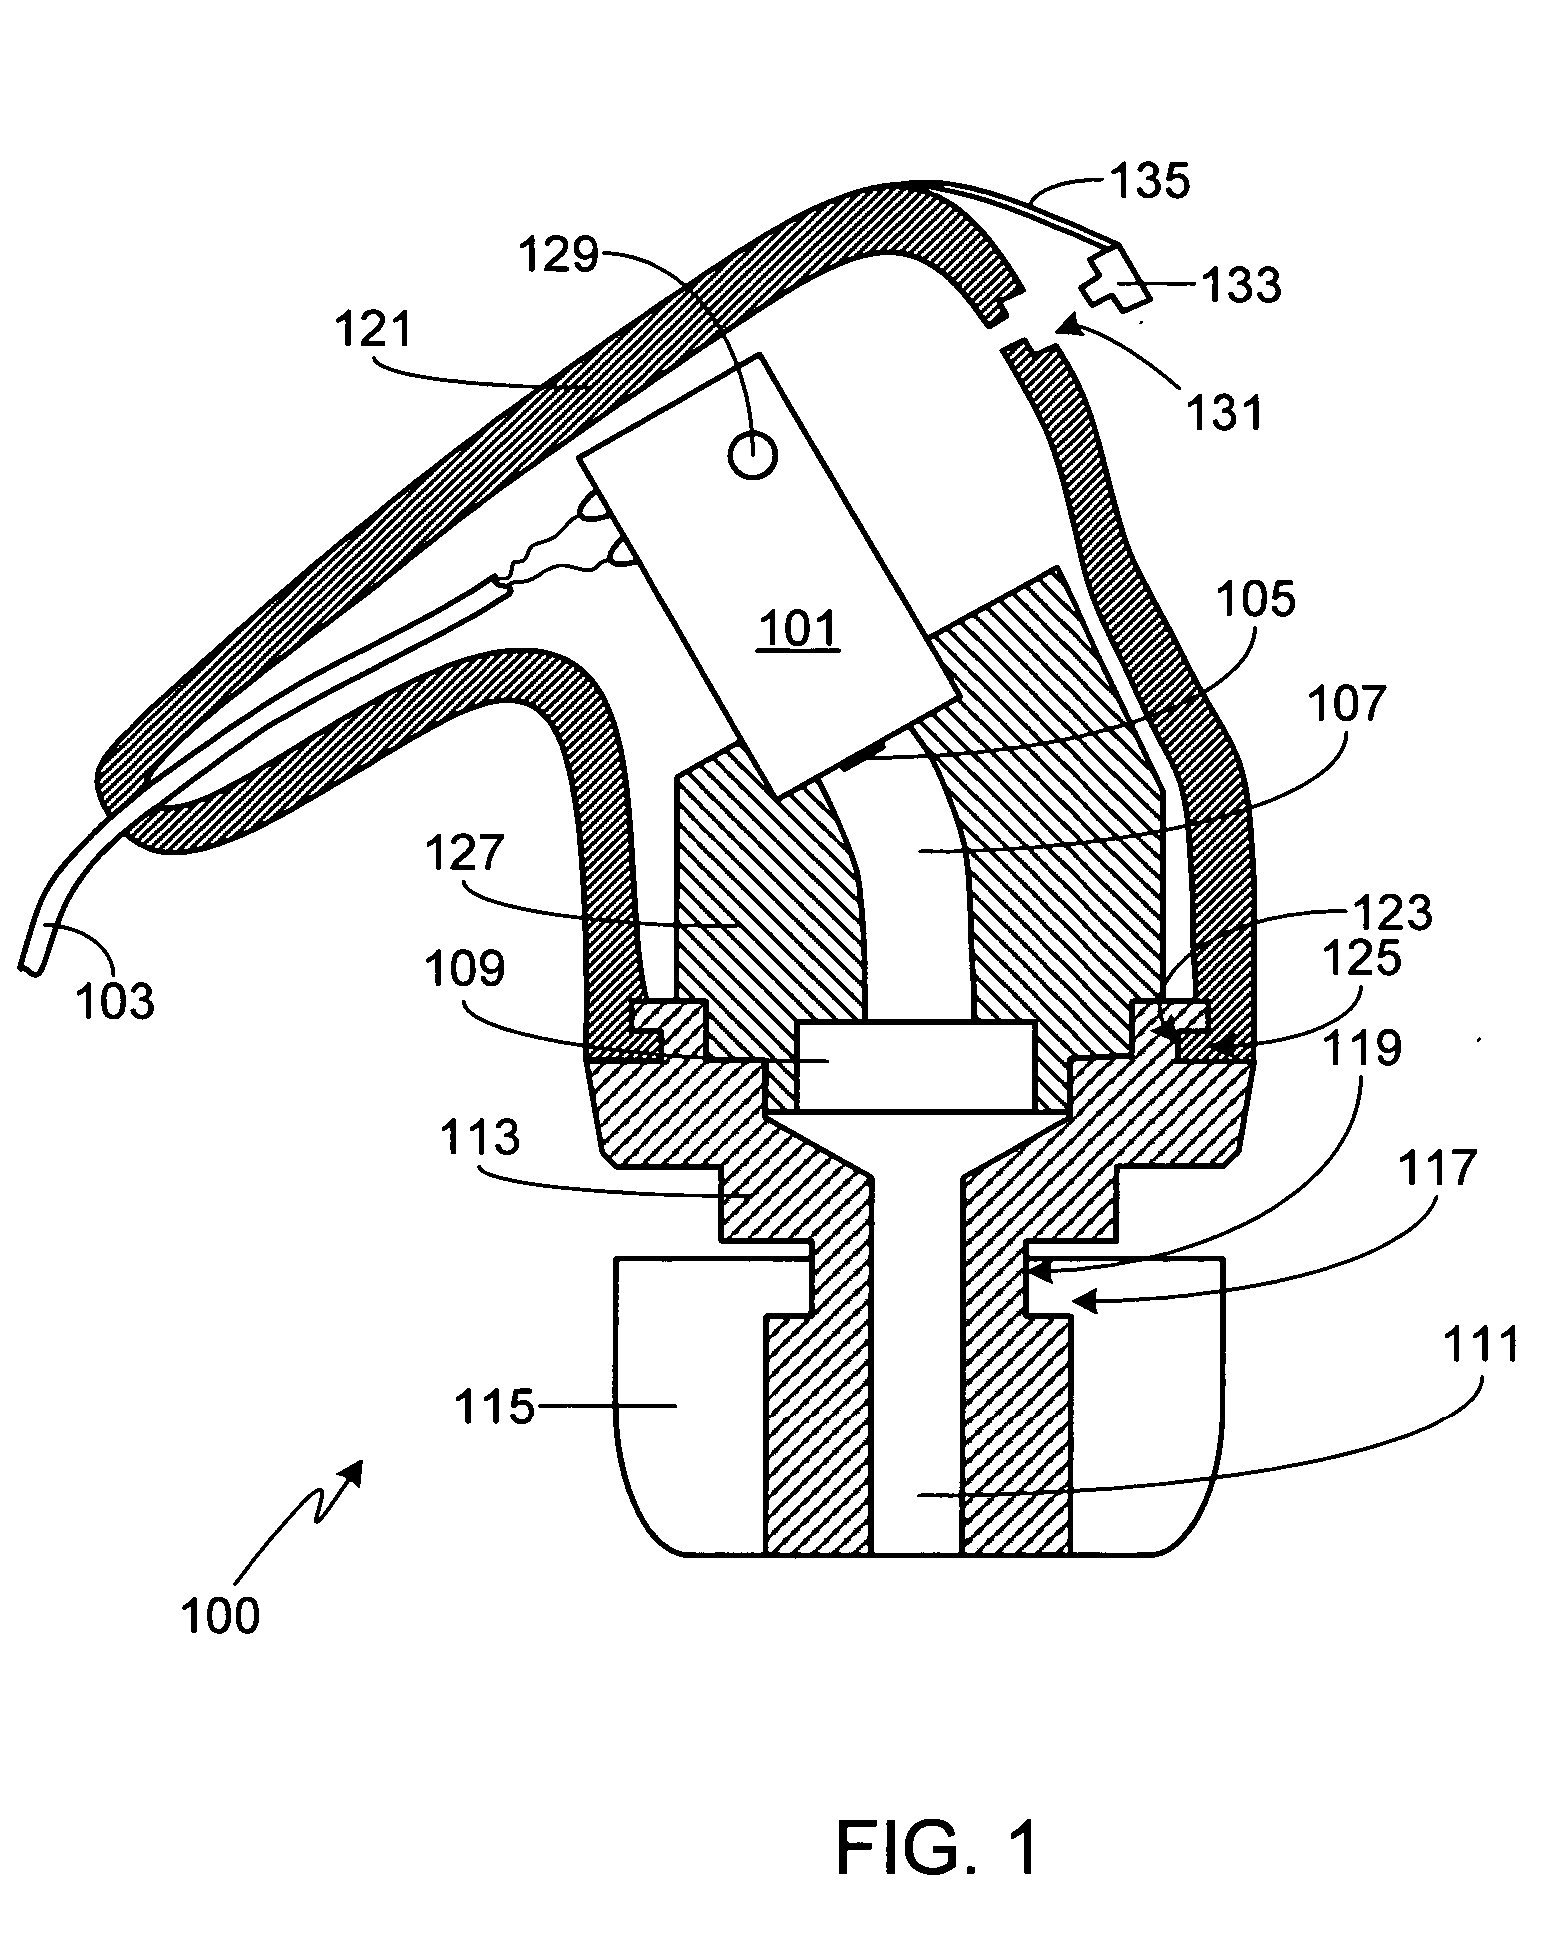 High-fidelity earpiece with adjustable frequency response